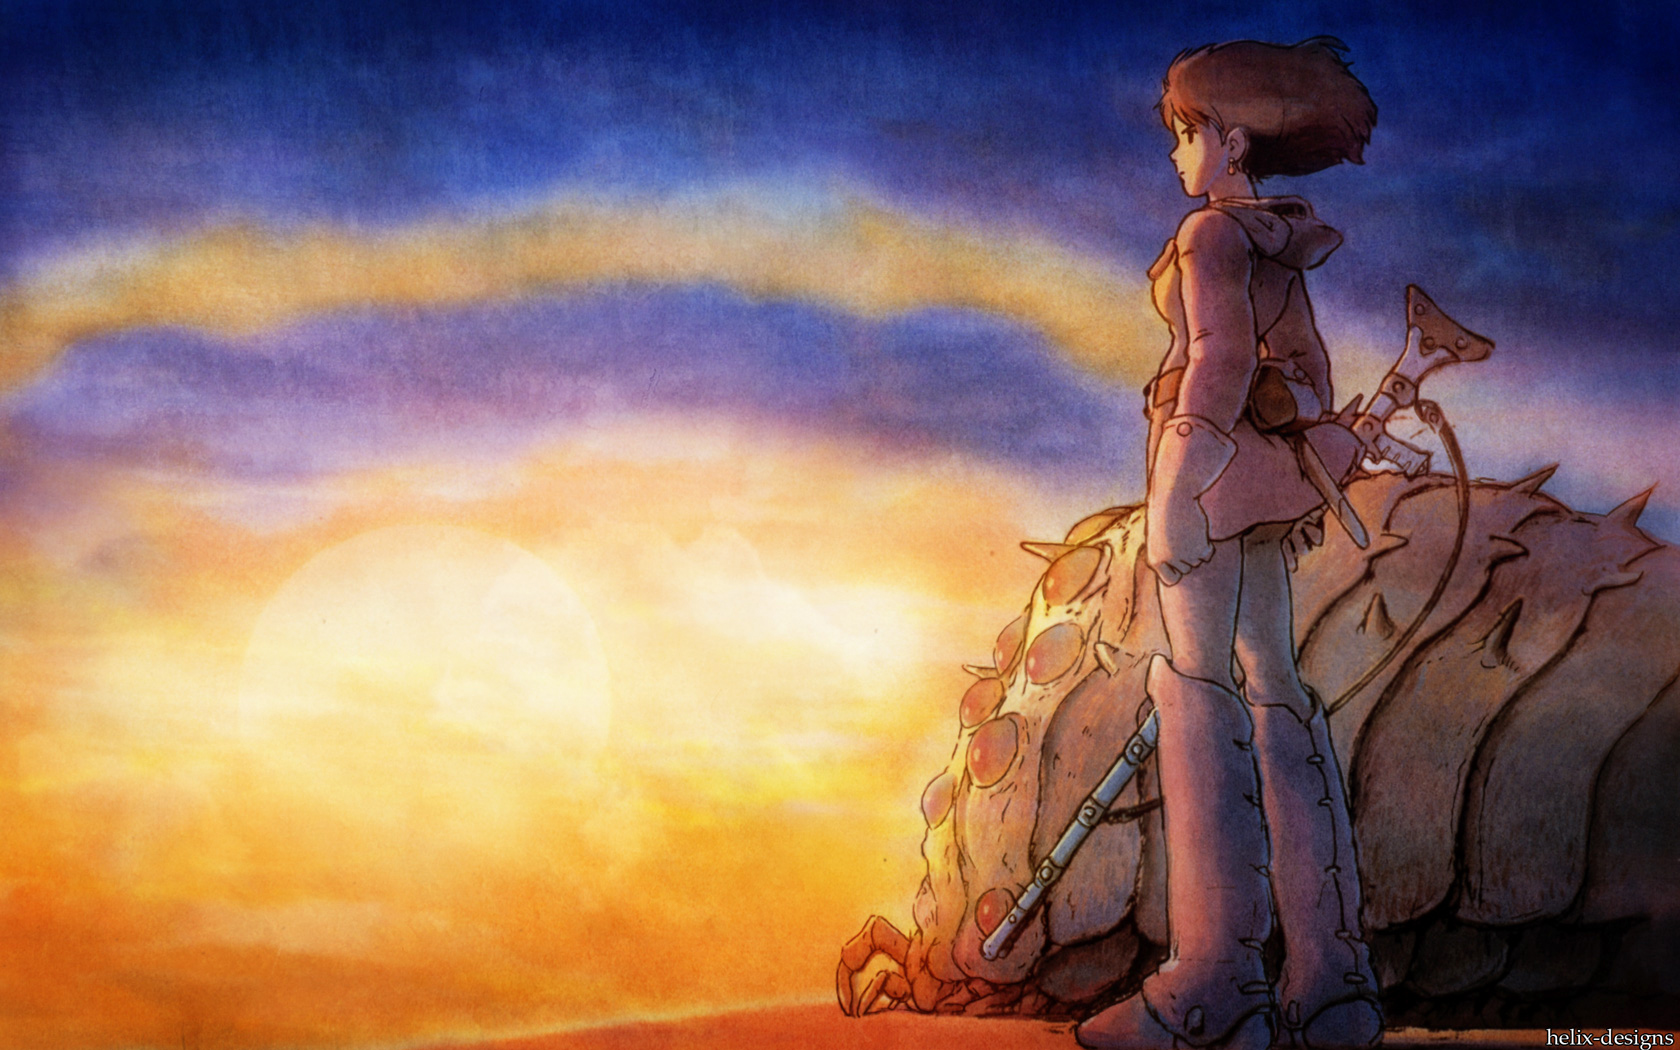 Download Anime Nausicaa Of The Valley Of The Wind Wallpaper